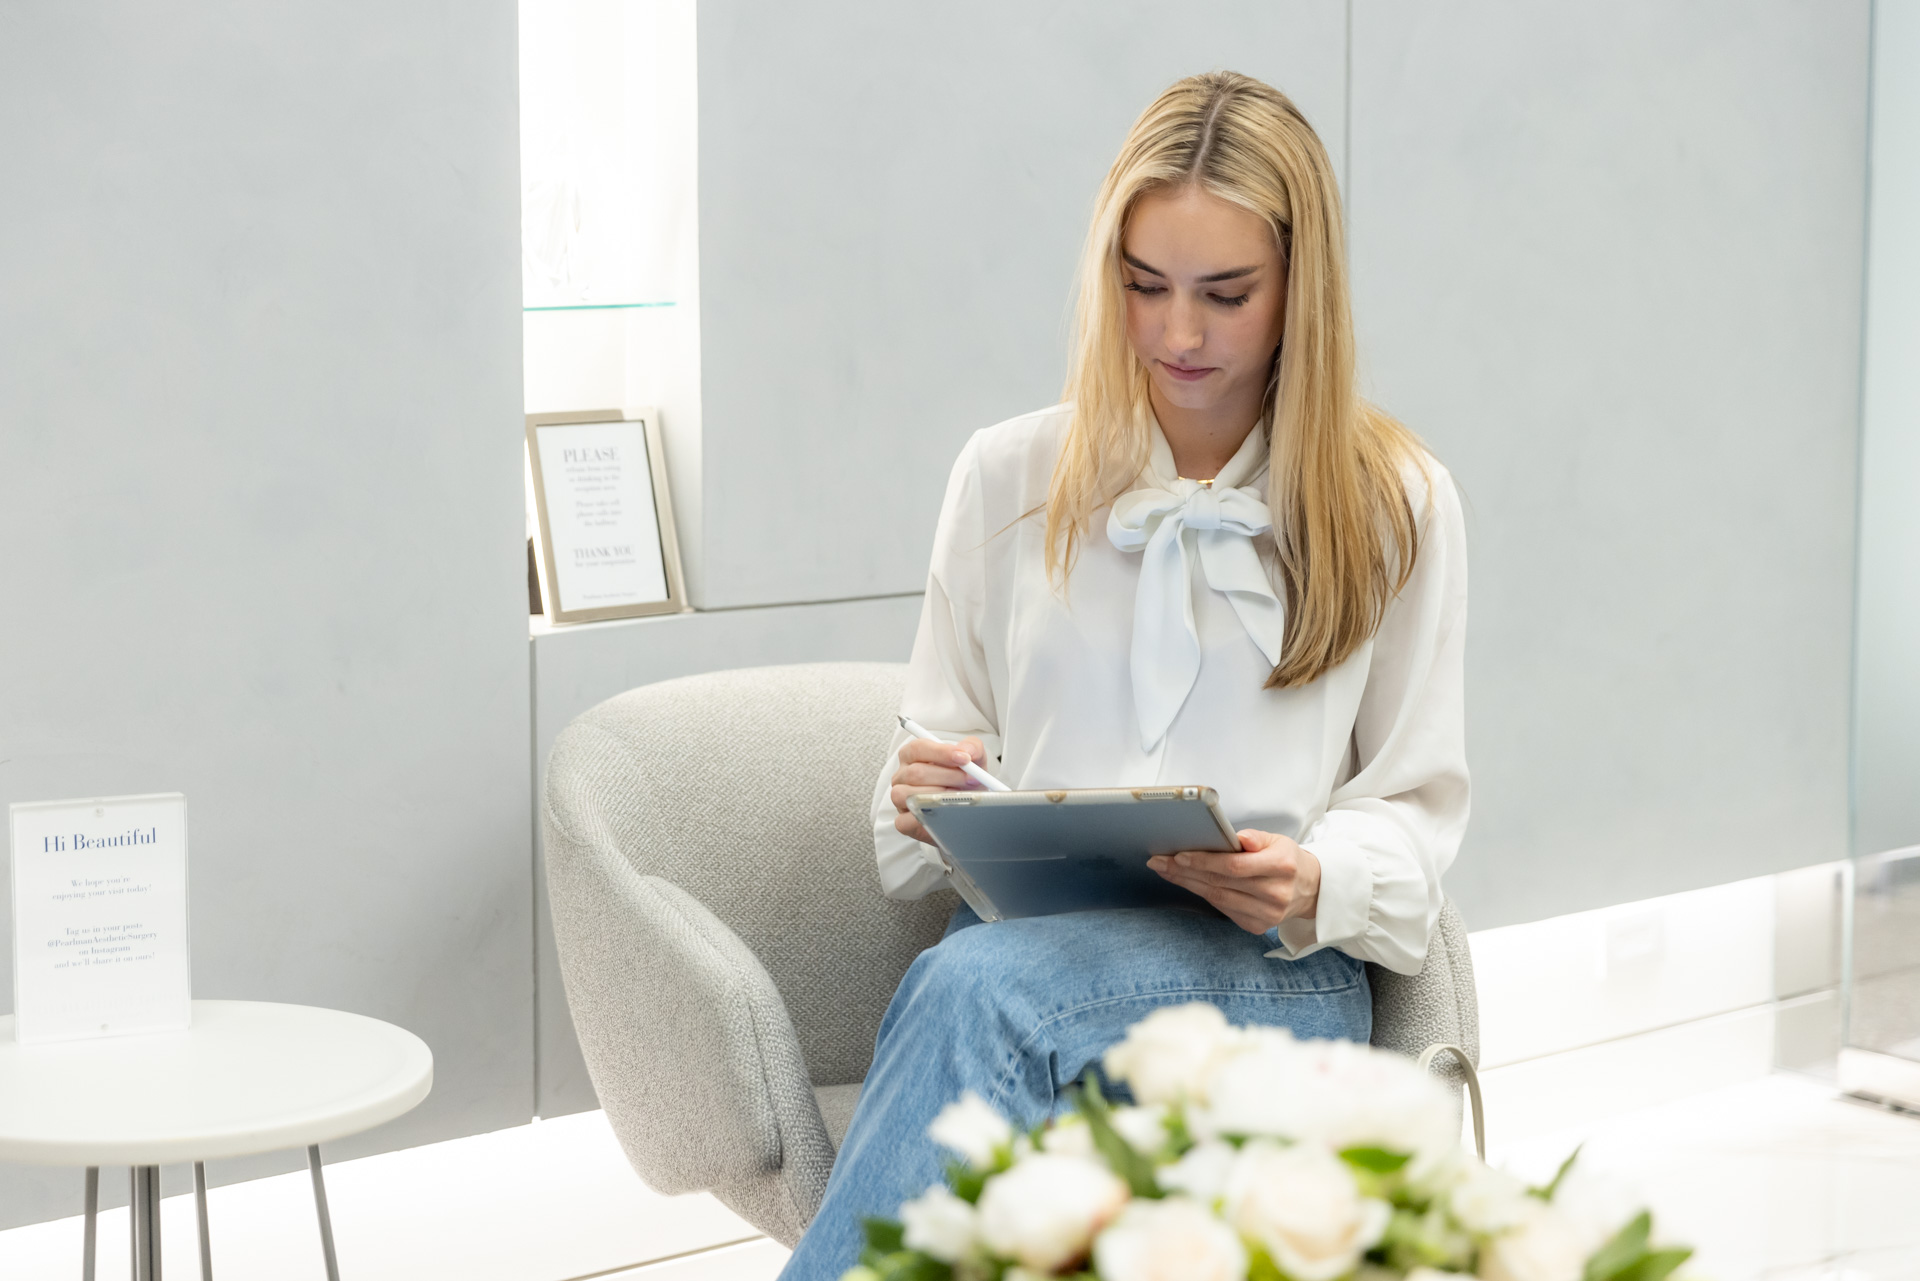 woman using iPad in lobby by flowers